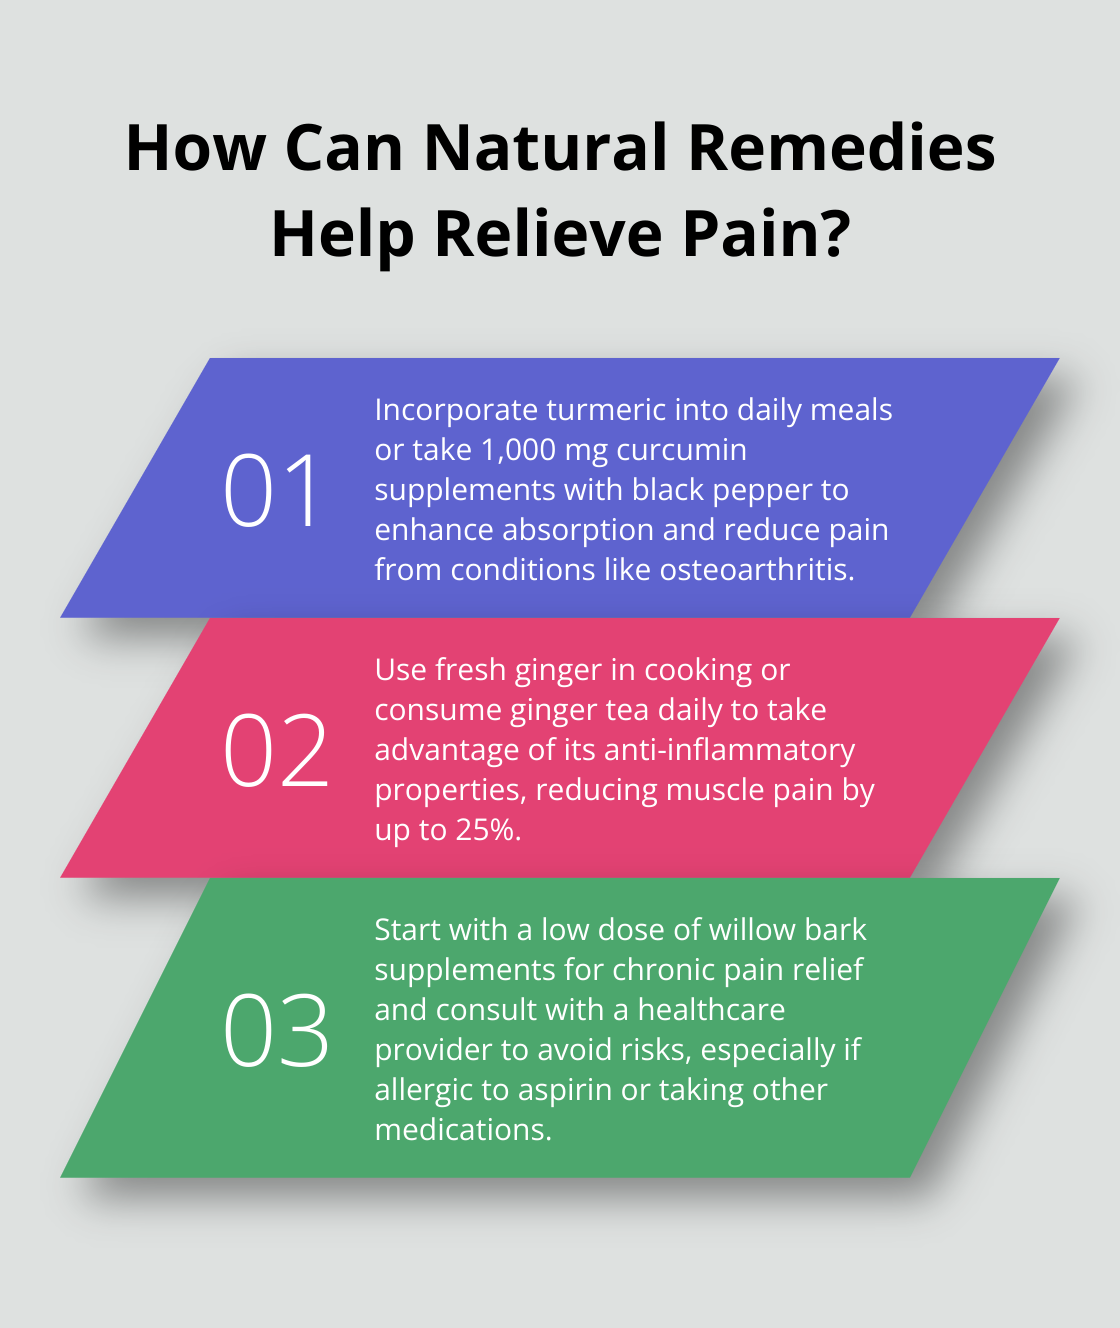 Fact - How Can Natural Remedies Help Relieve Pain?